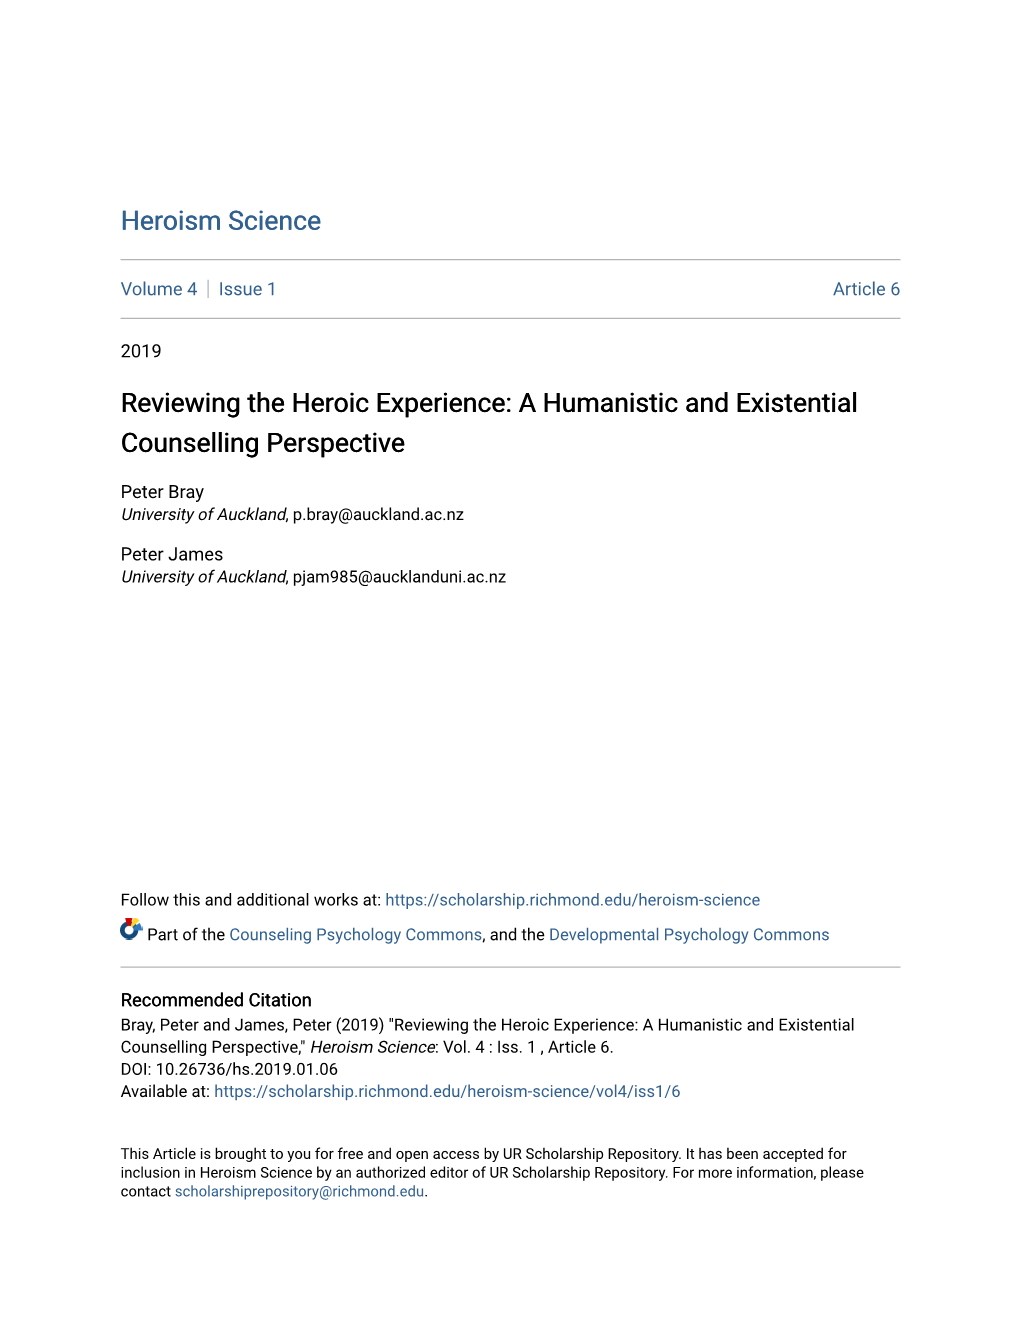 Reviewing the Heroic Experience: a Humanistic and Existential Counselling Perspective